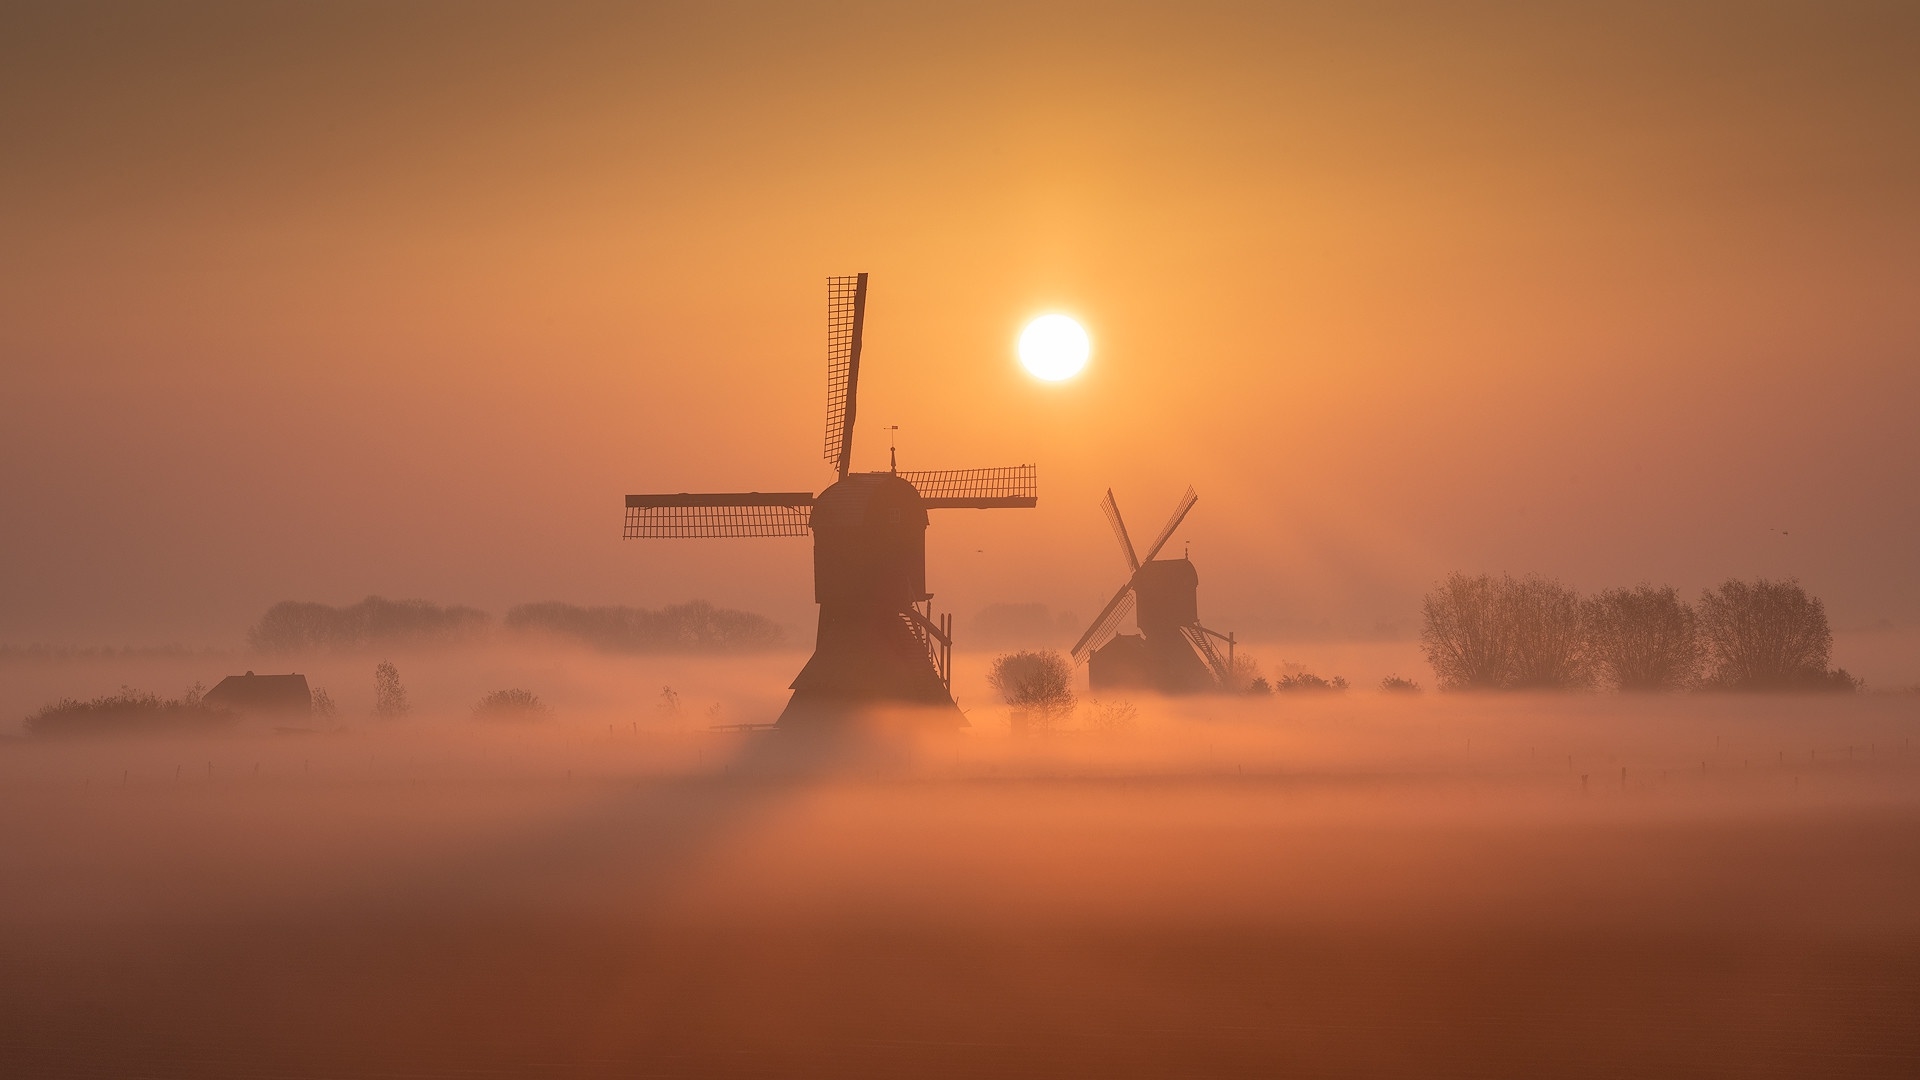 390437 Noord Holland Province The Netherlands 4k - Rare Gallery HD  Wallpapers